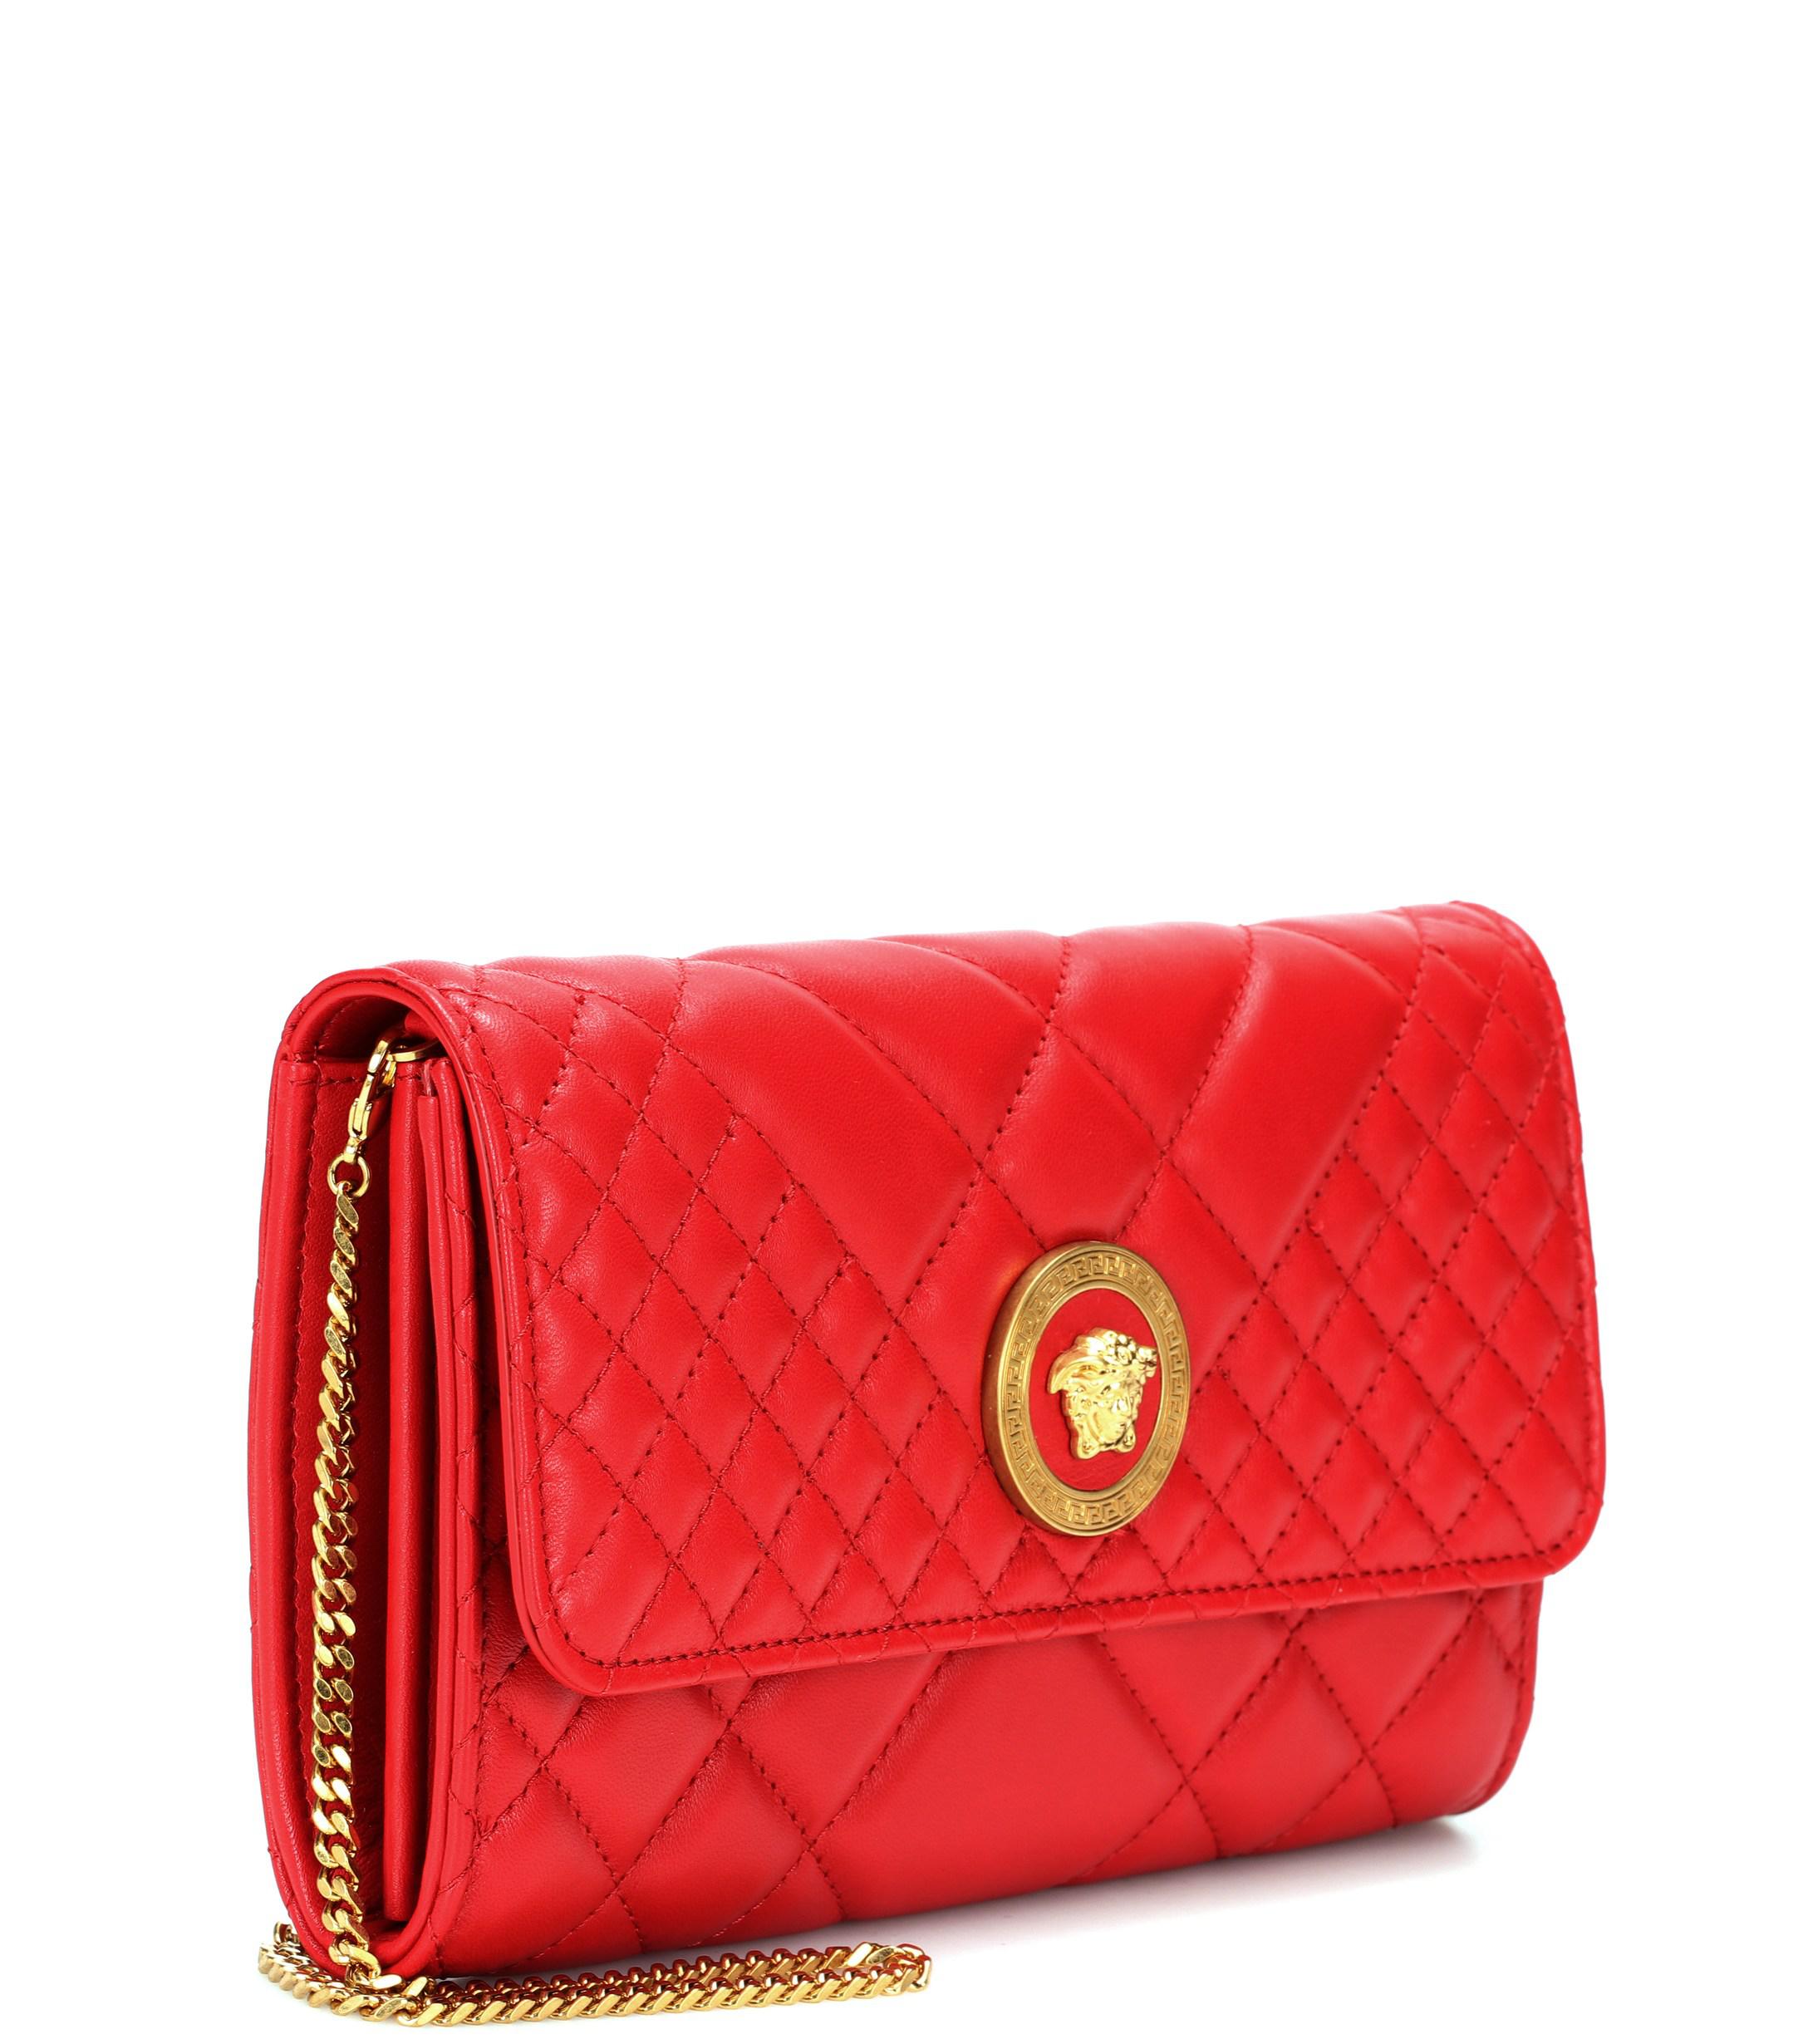 Versace Medusa Icon Leather Shoulder Bag in Red - Lyst